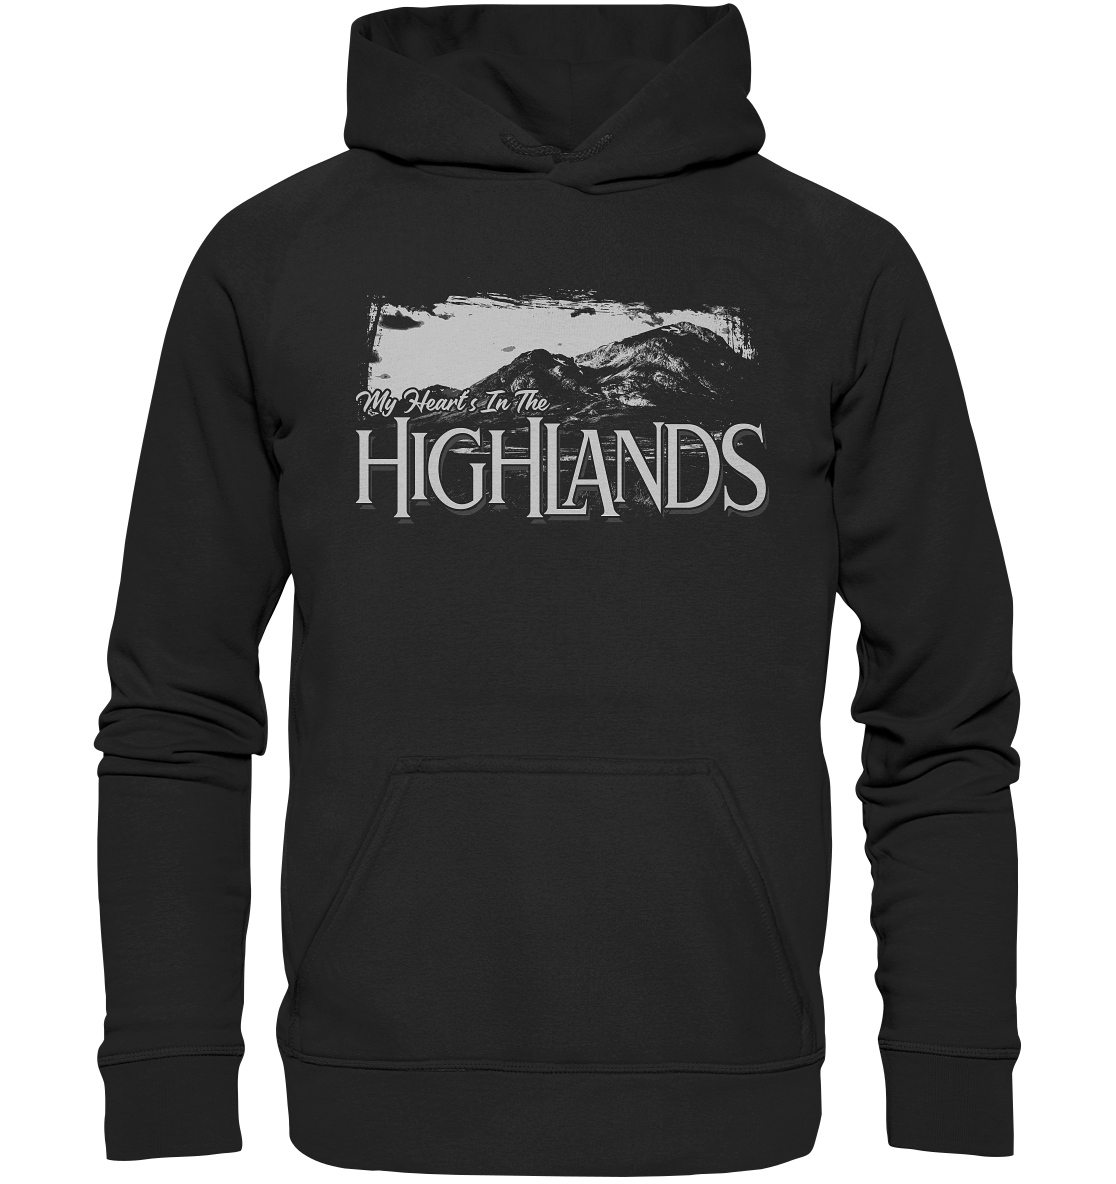 "My Heart's In The Highlands" - Basic Unisex Hoodie